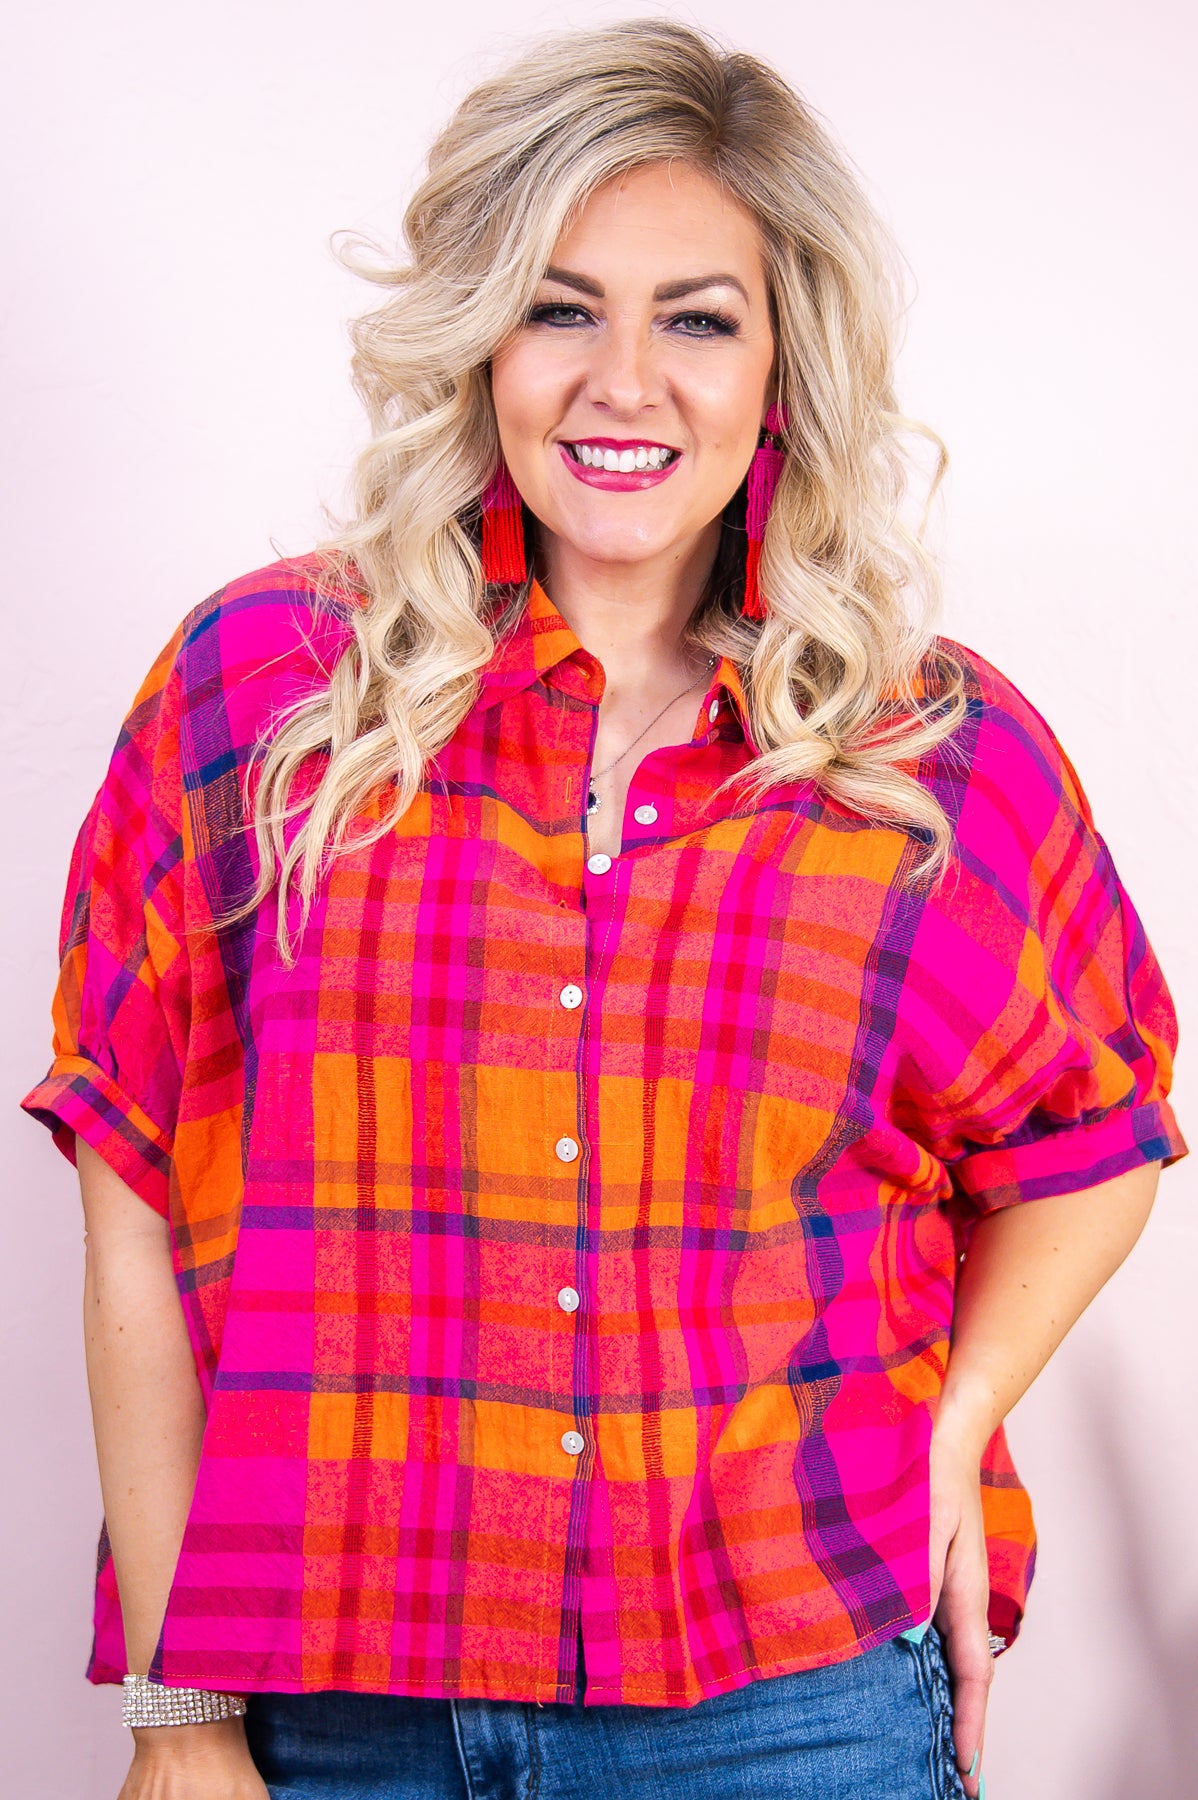 Life Is What You Make It Fuchsia/Multi Color Plaid High-Low Top - T9448FU